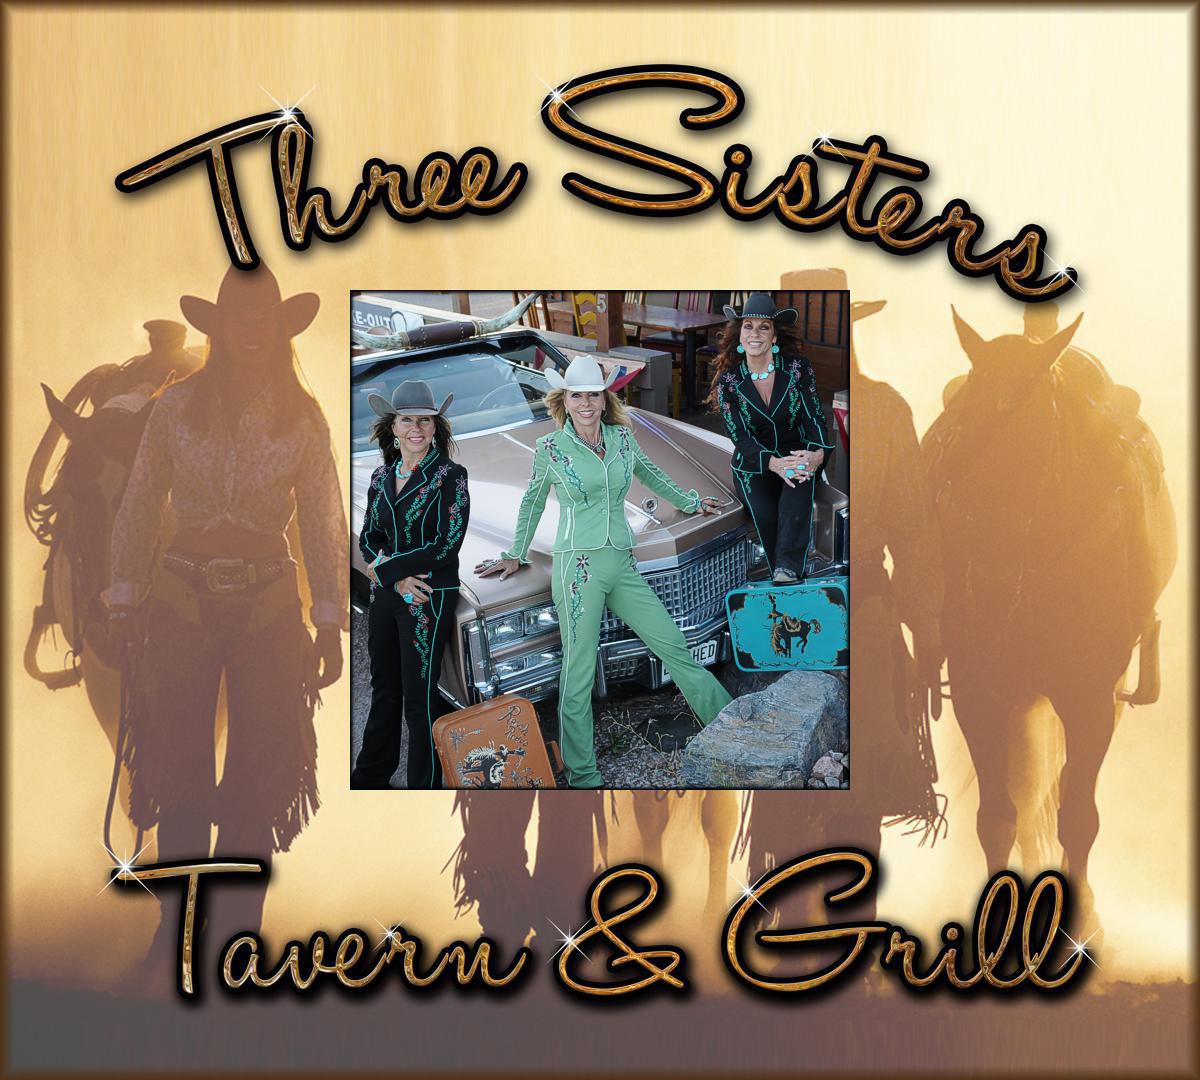 Three Sisters Tavern and Grill